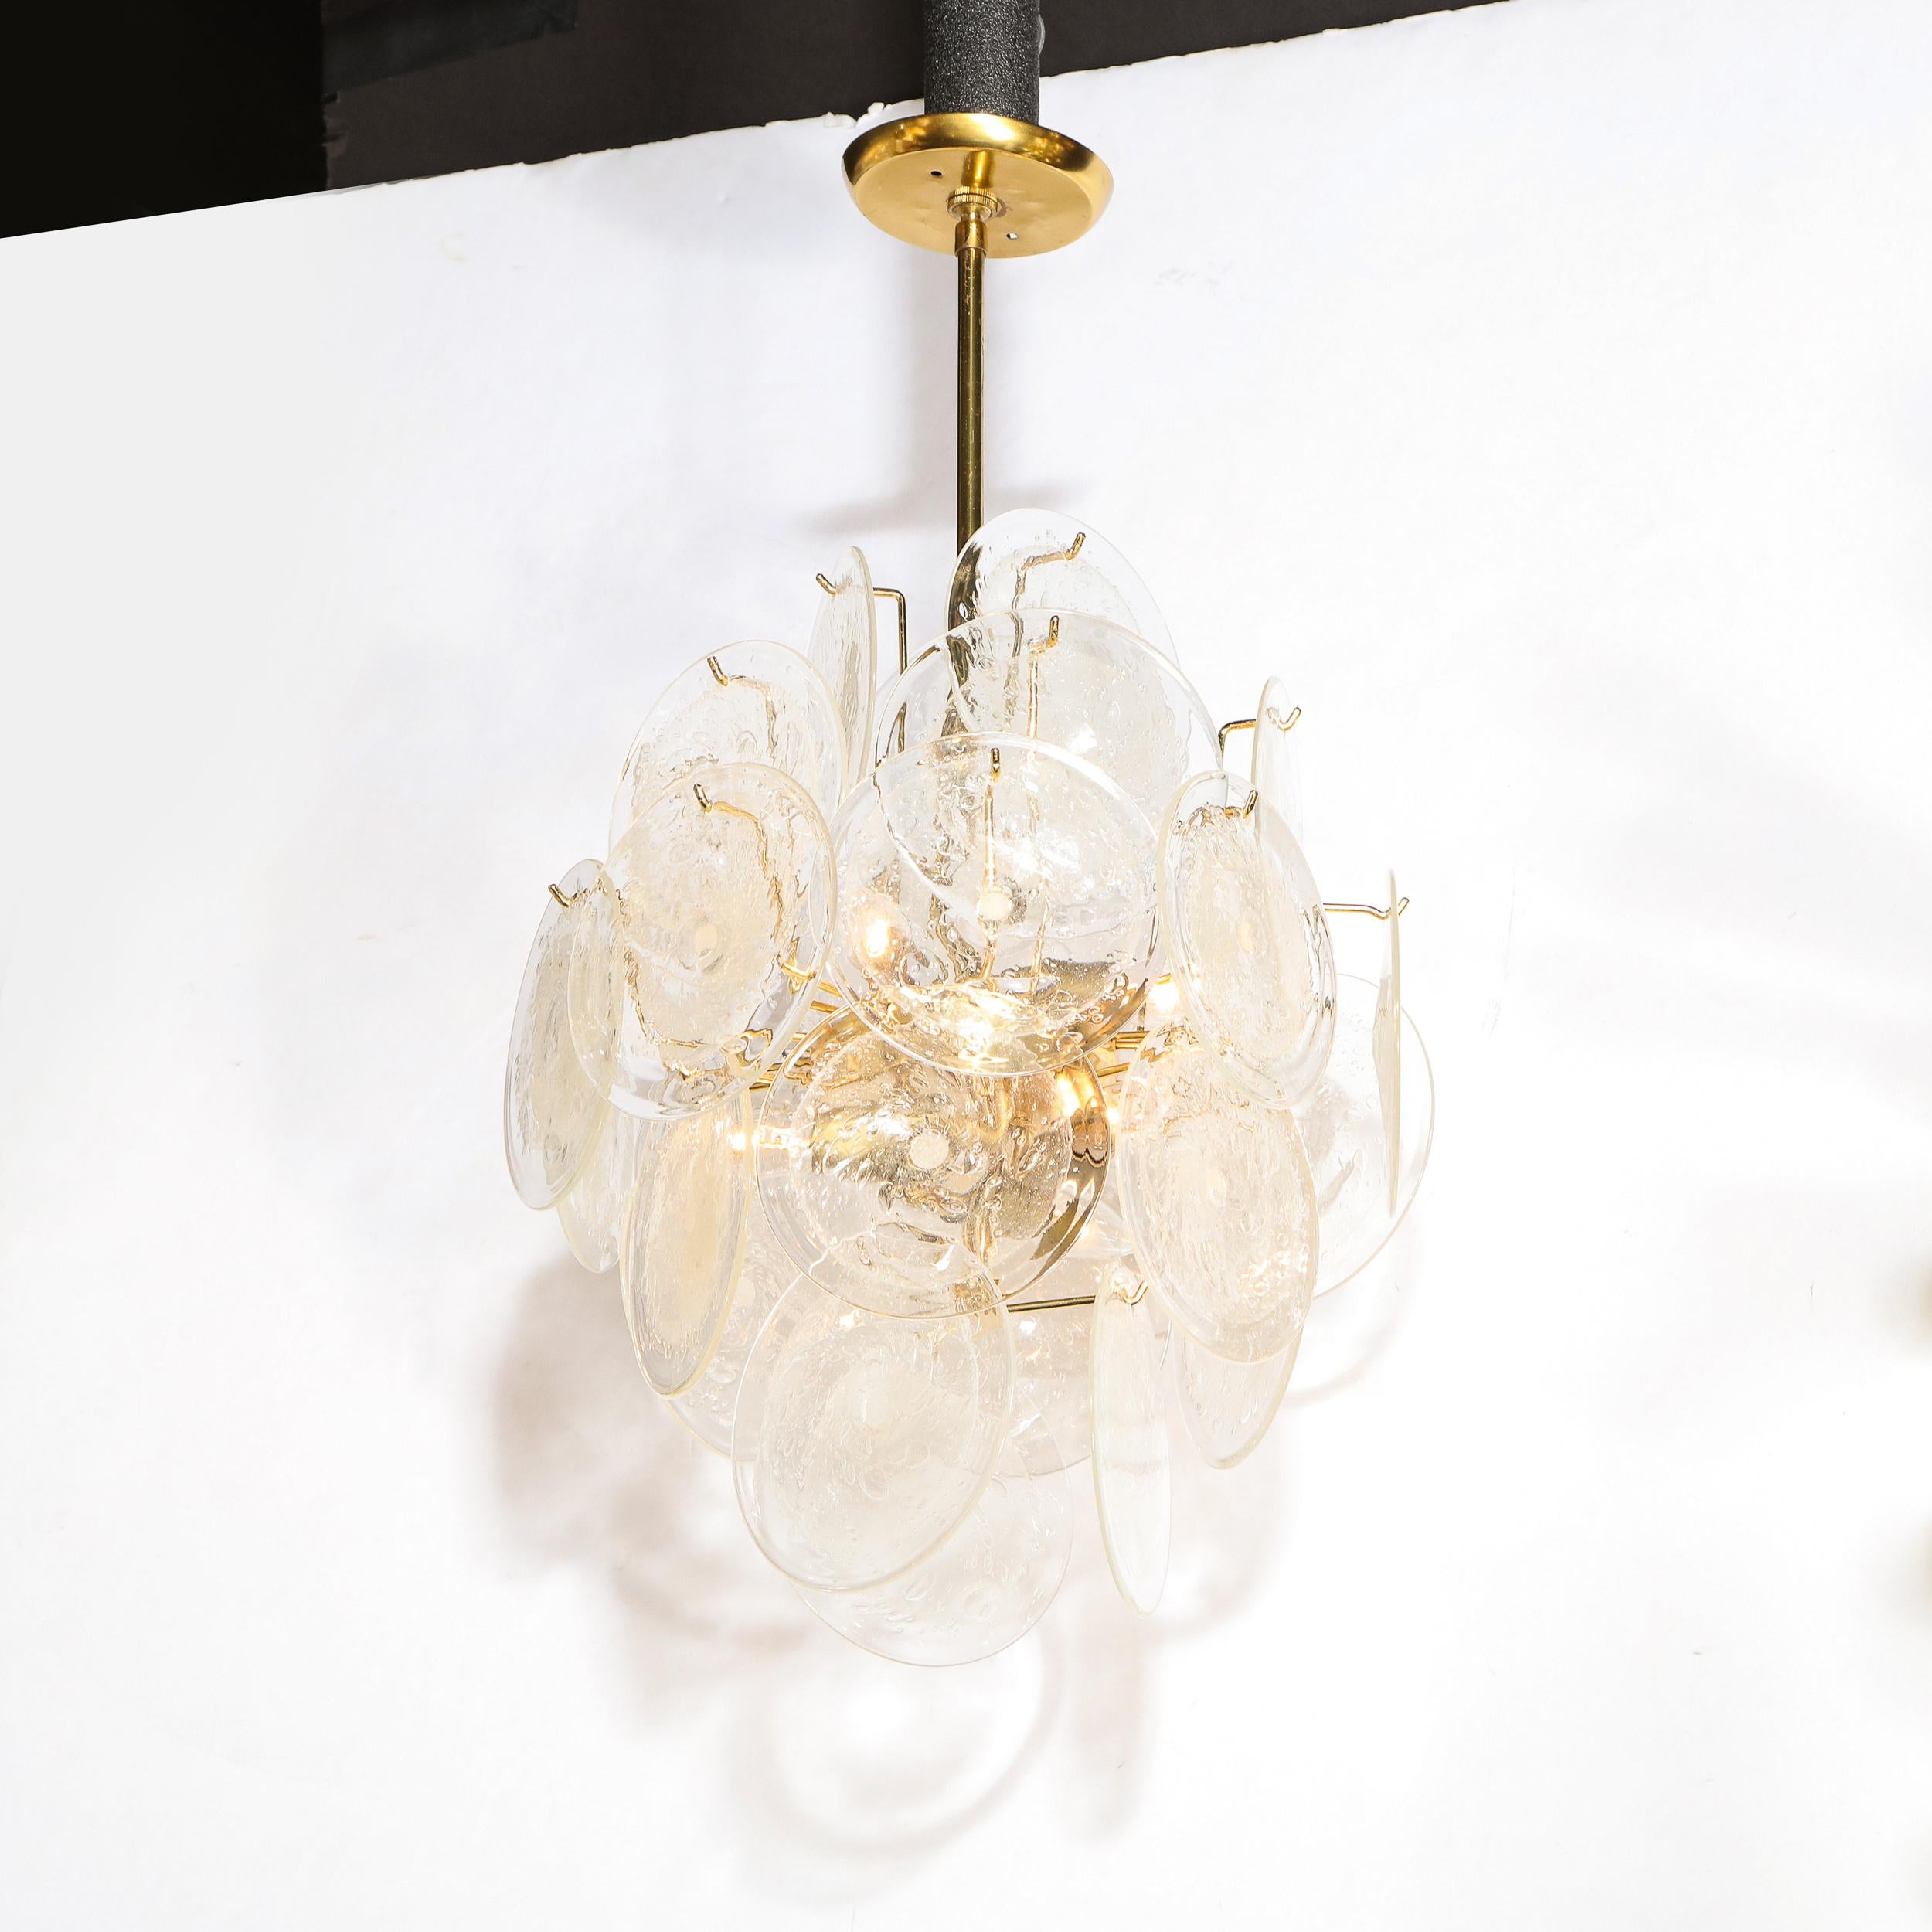 This stunning modernist chandelier was handblown in Murano, Italy- the island off the coast of Venice renowned for centuries for its superlative glass production. It features a wealth of translucent discs with an organic texture, creating a subtle